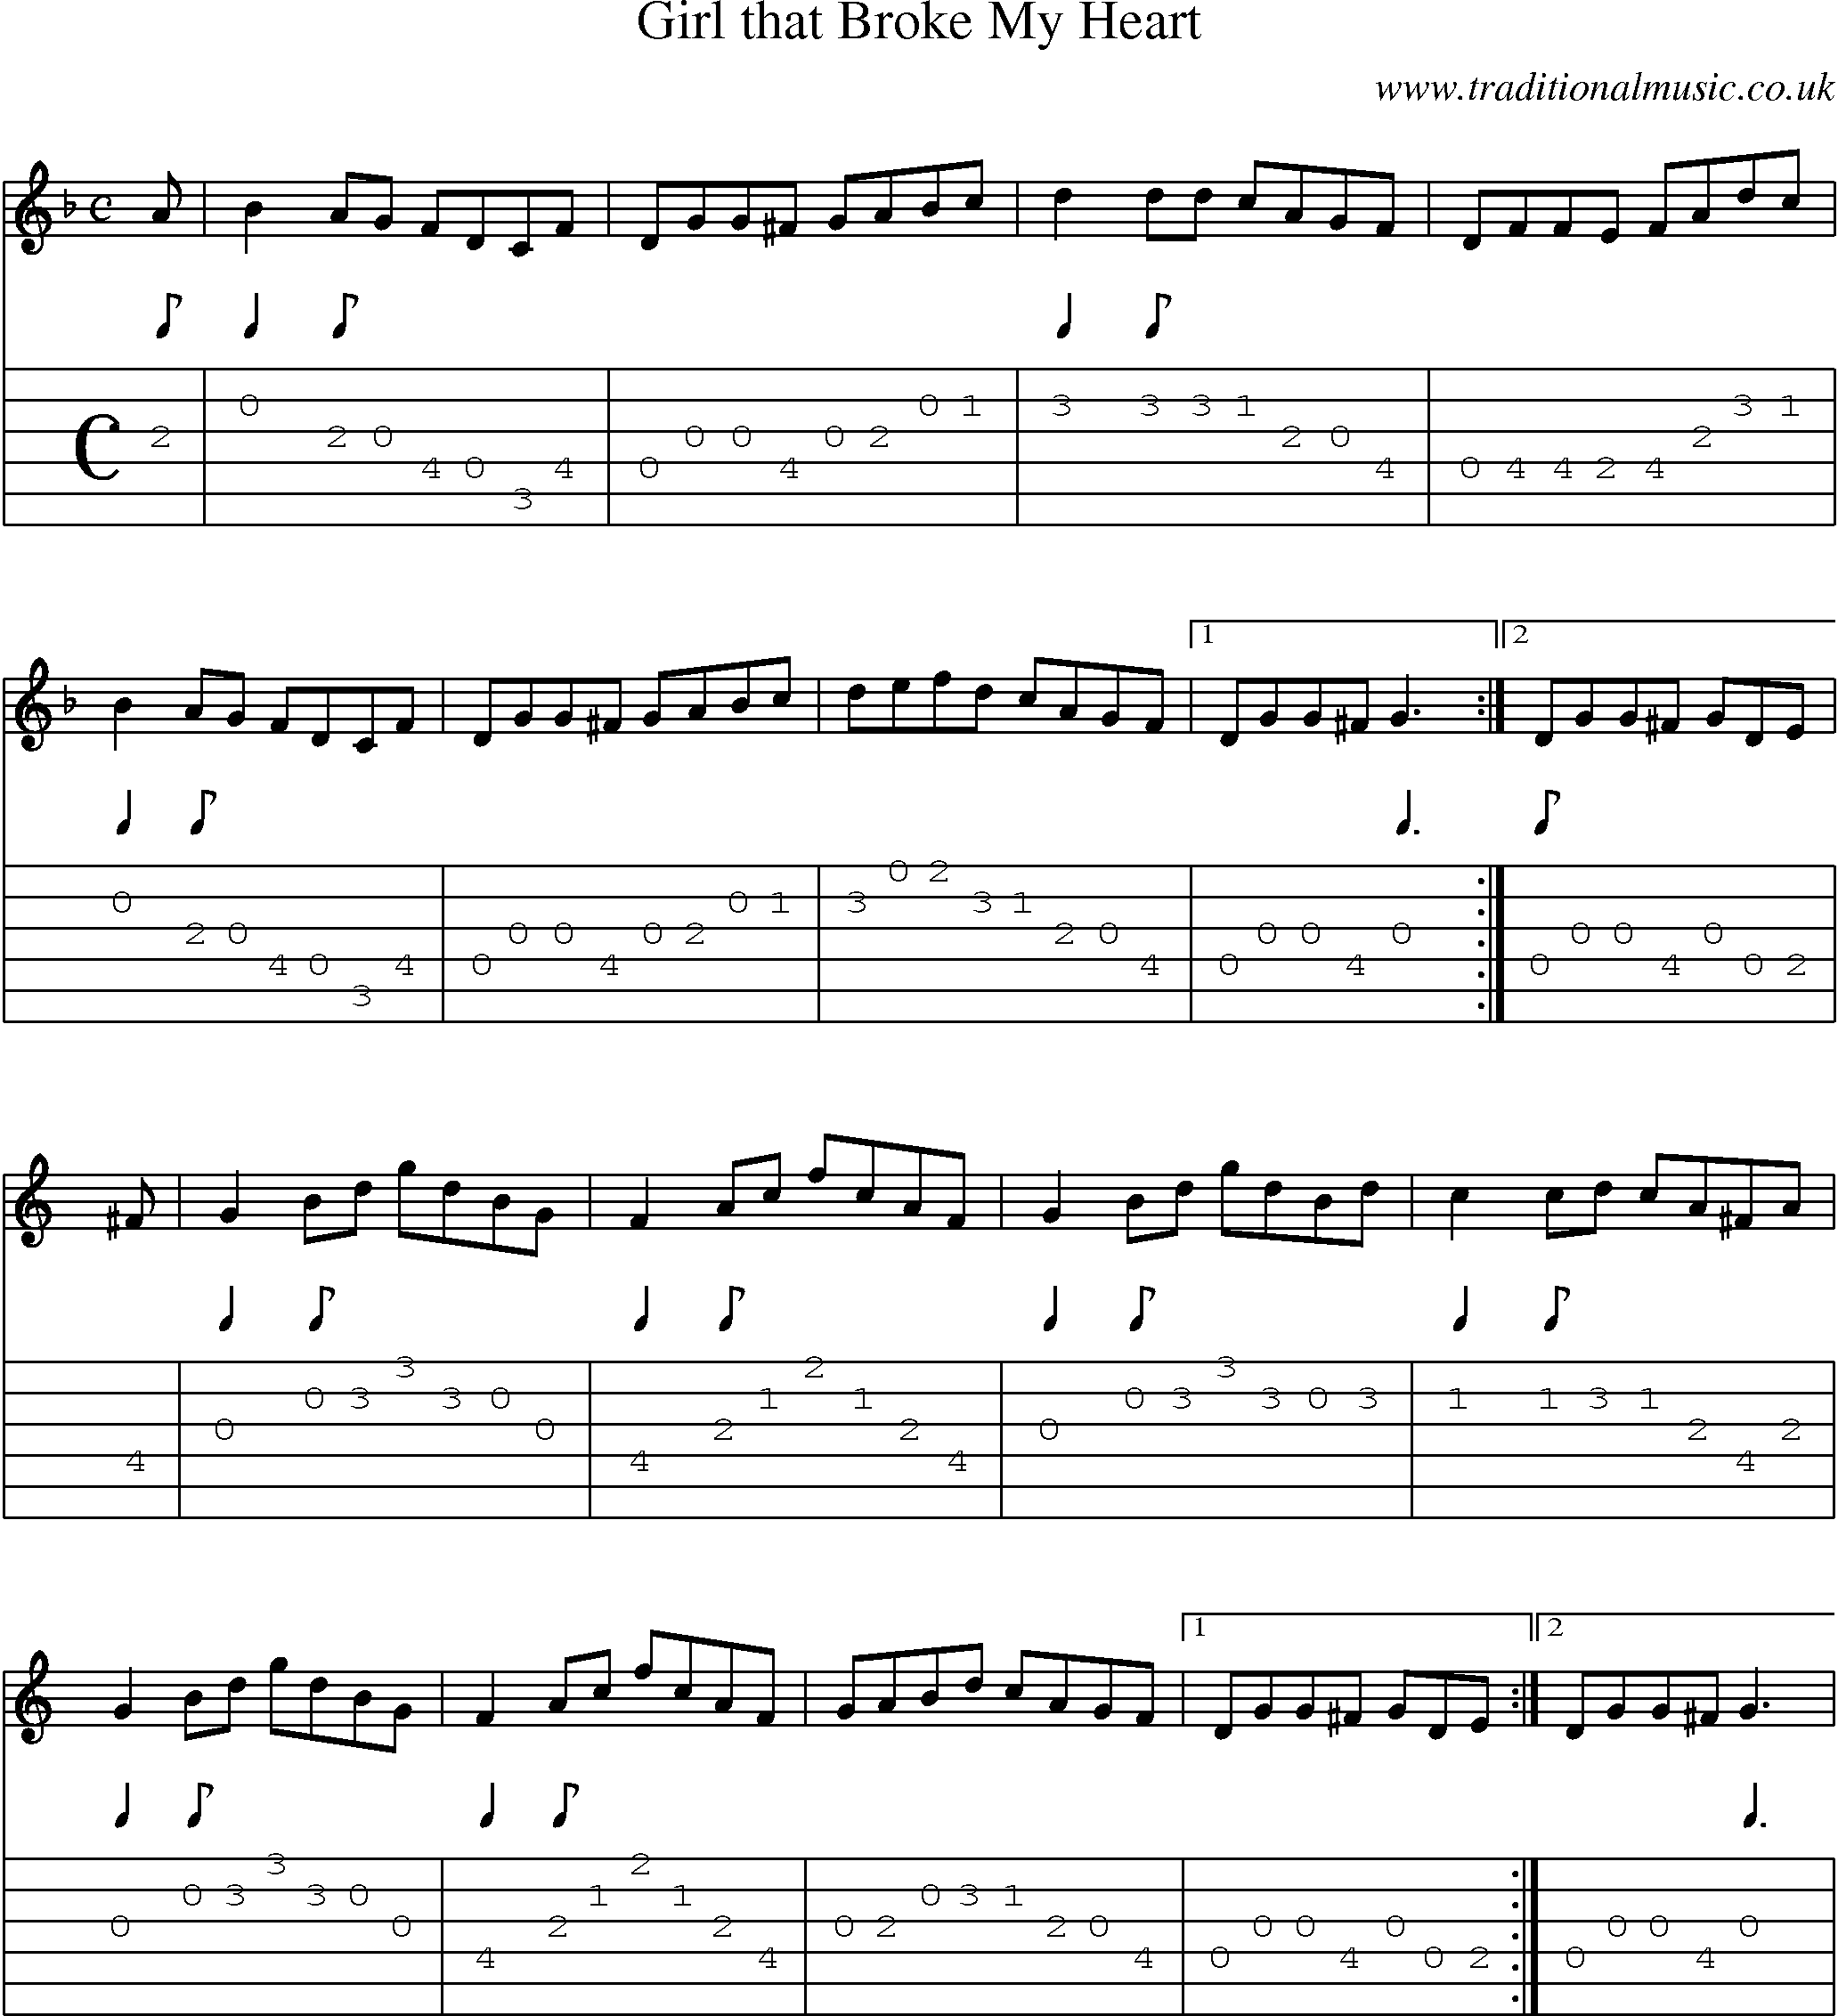 Music Score and Guitar Tabs for Girl That Broke My Heart